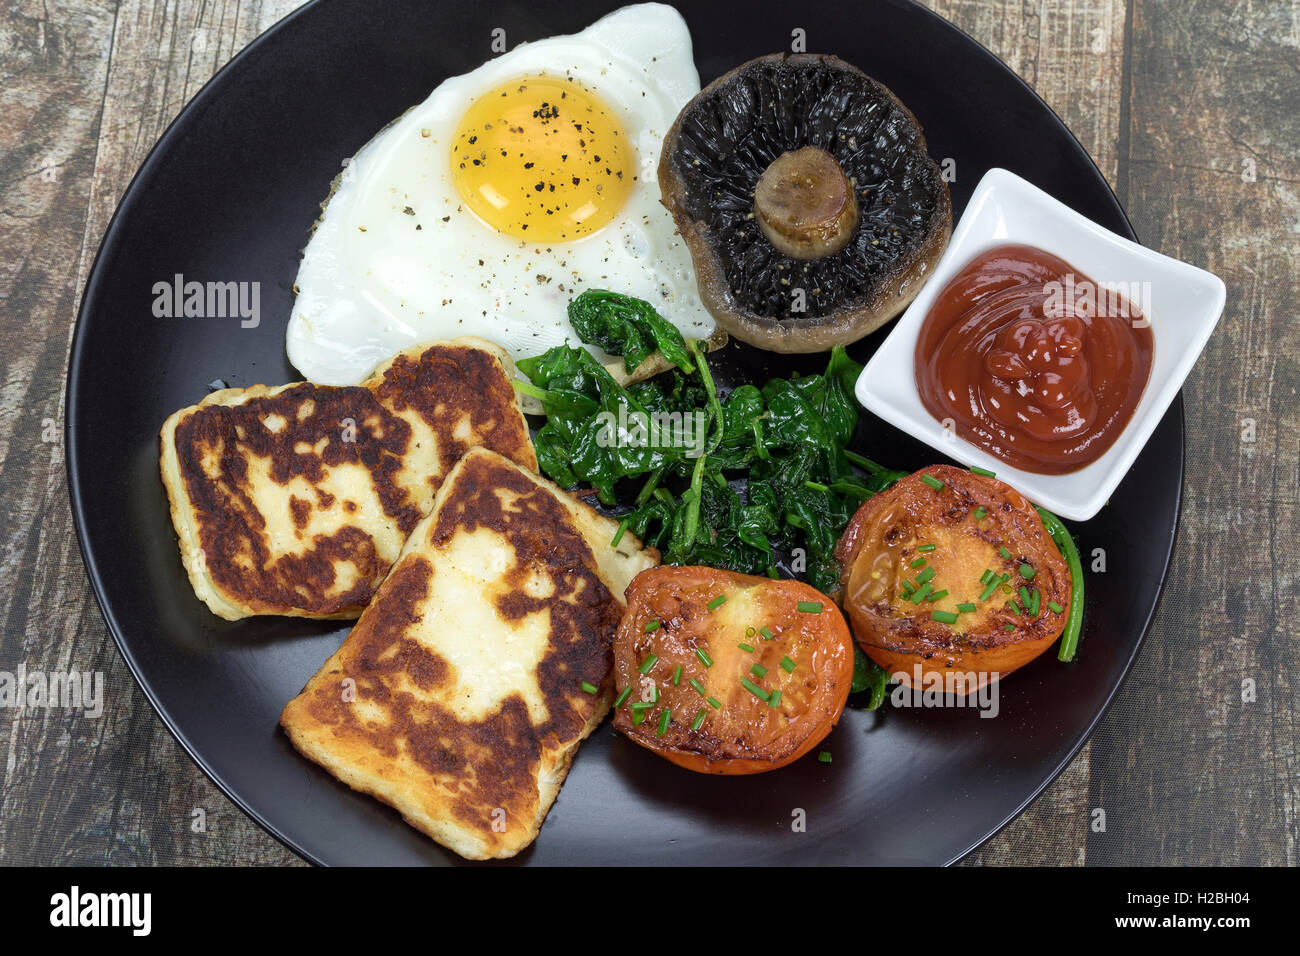 A fried vegetarian breakfast with halloumi cheese Stock Photo